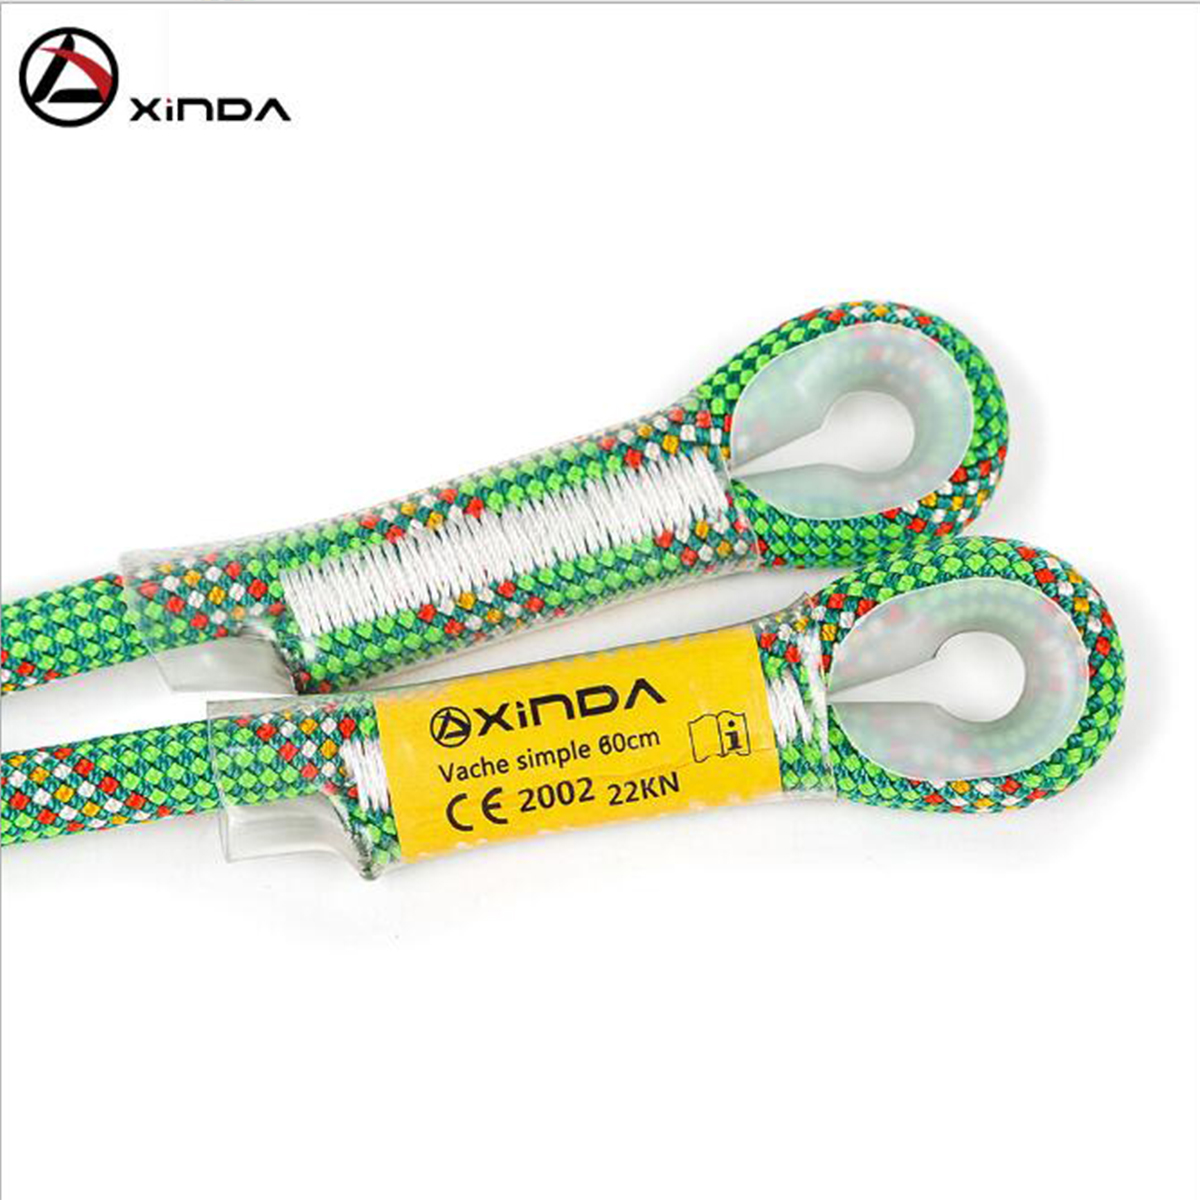 Xinda-105mm-80100120150cm-Professional-Rock-Climbing-Rope-Supplies-High-Altitude-Anti-Fall-Off-Prote-1570418-5